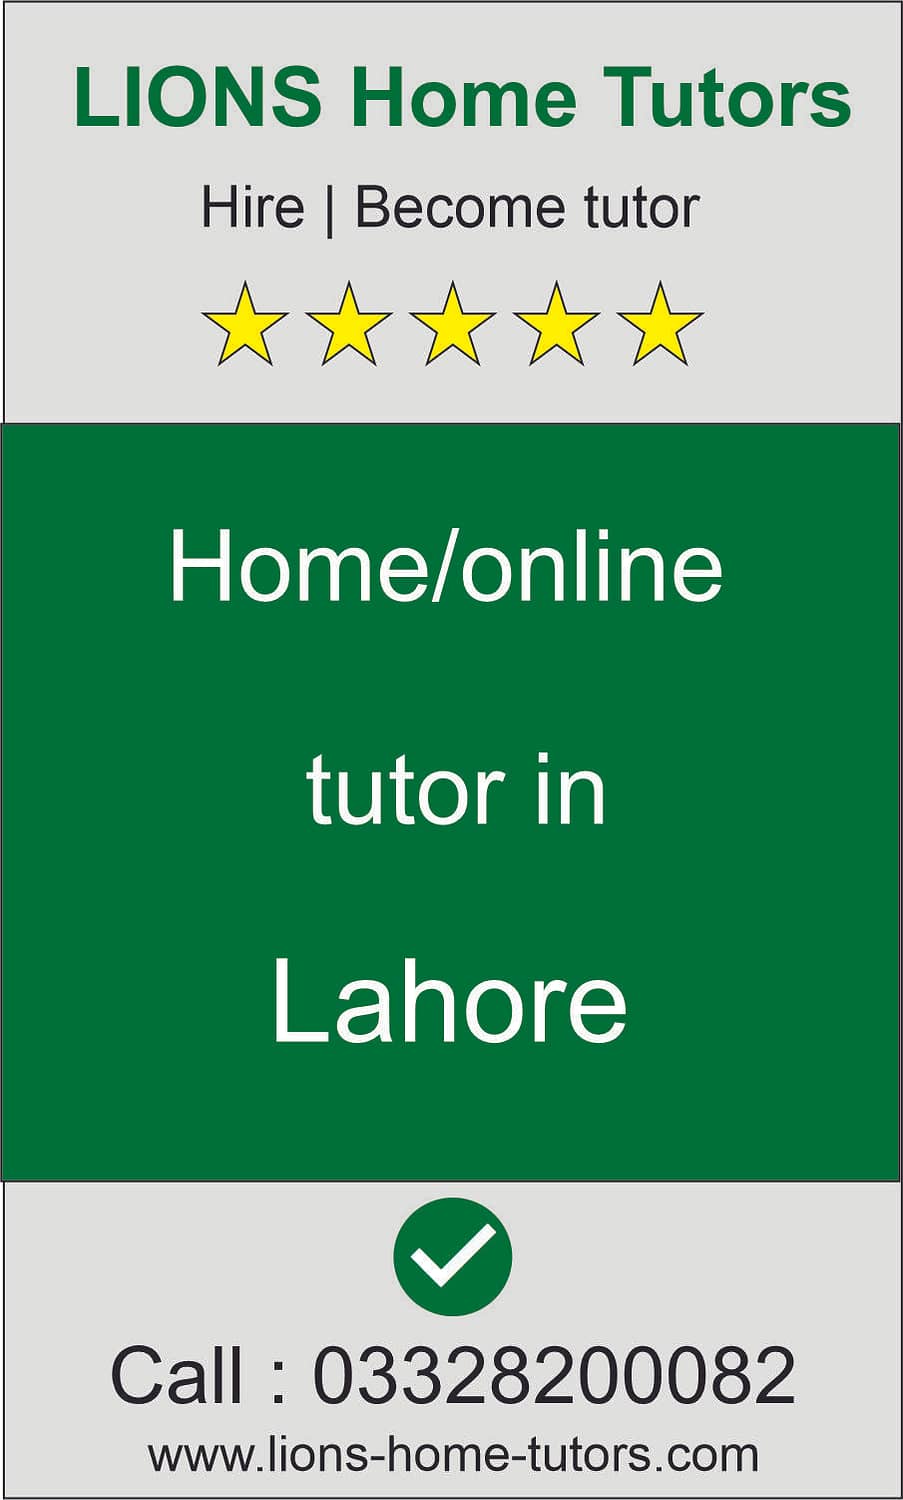 Home tutor in Lahore